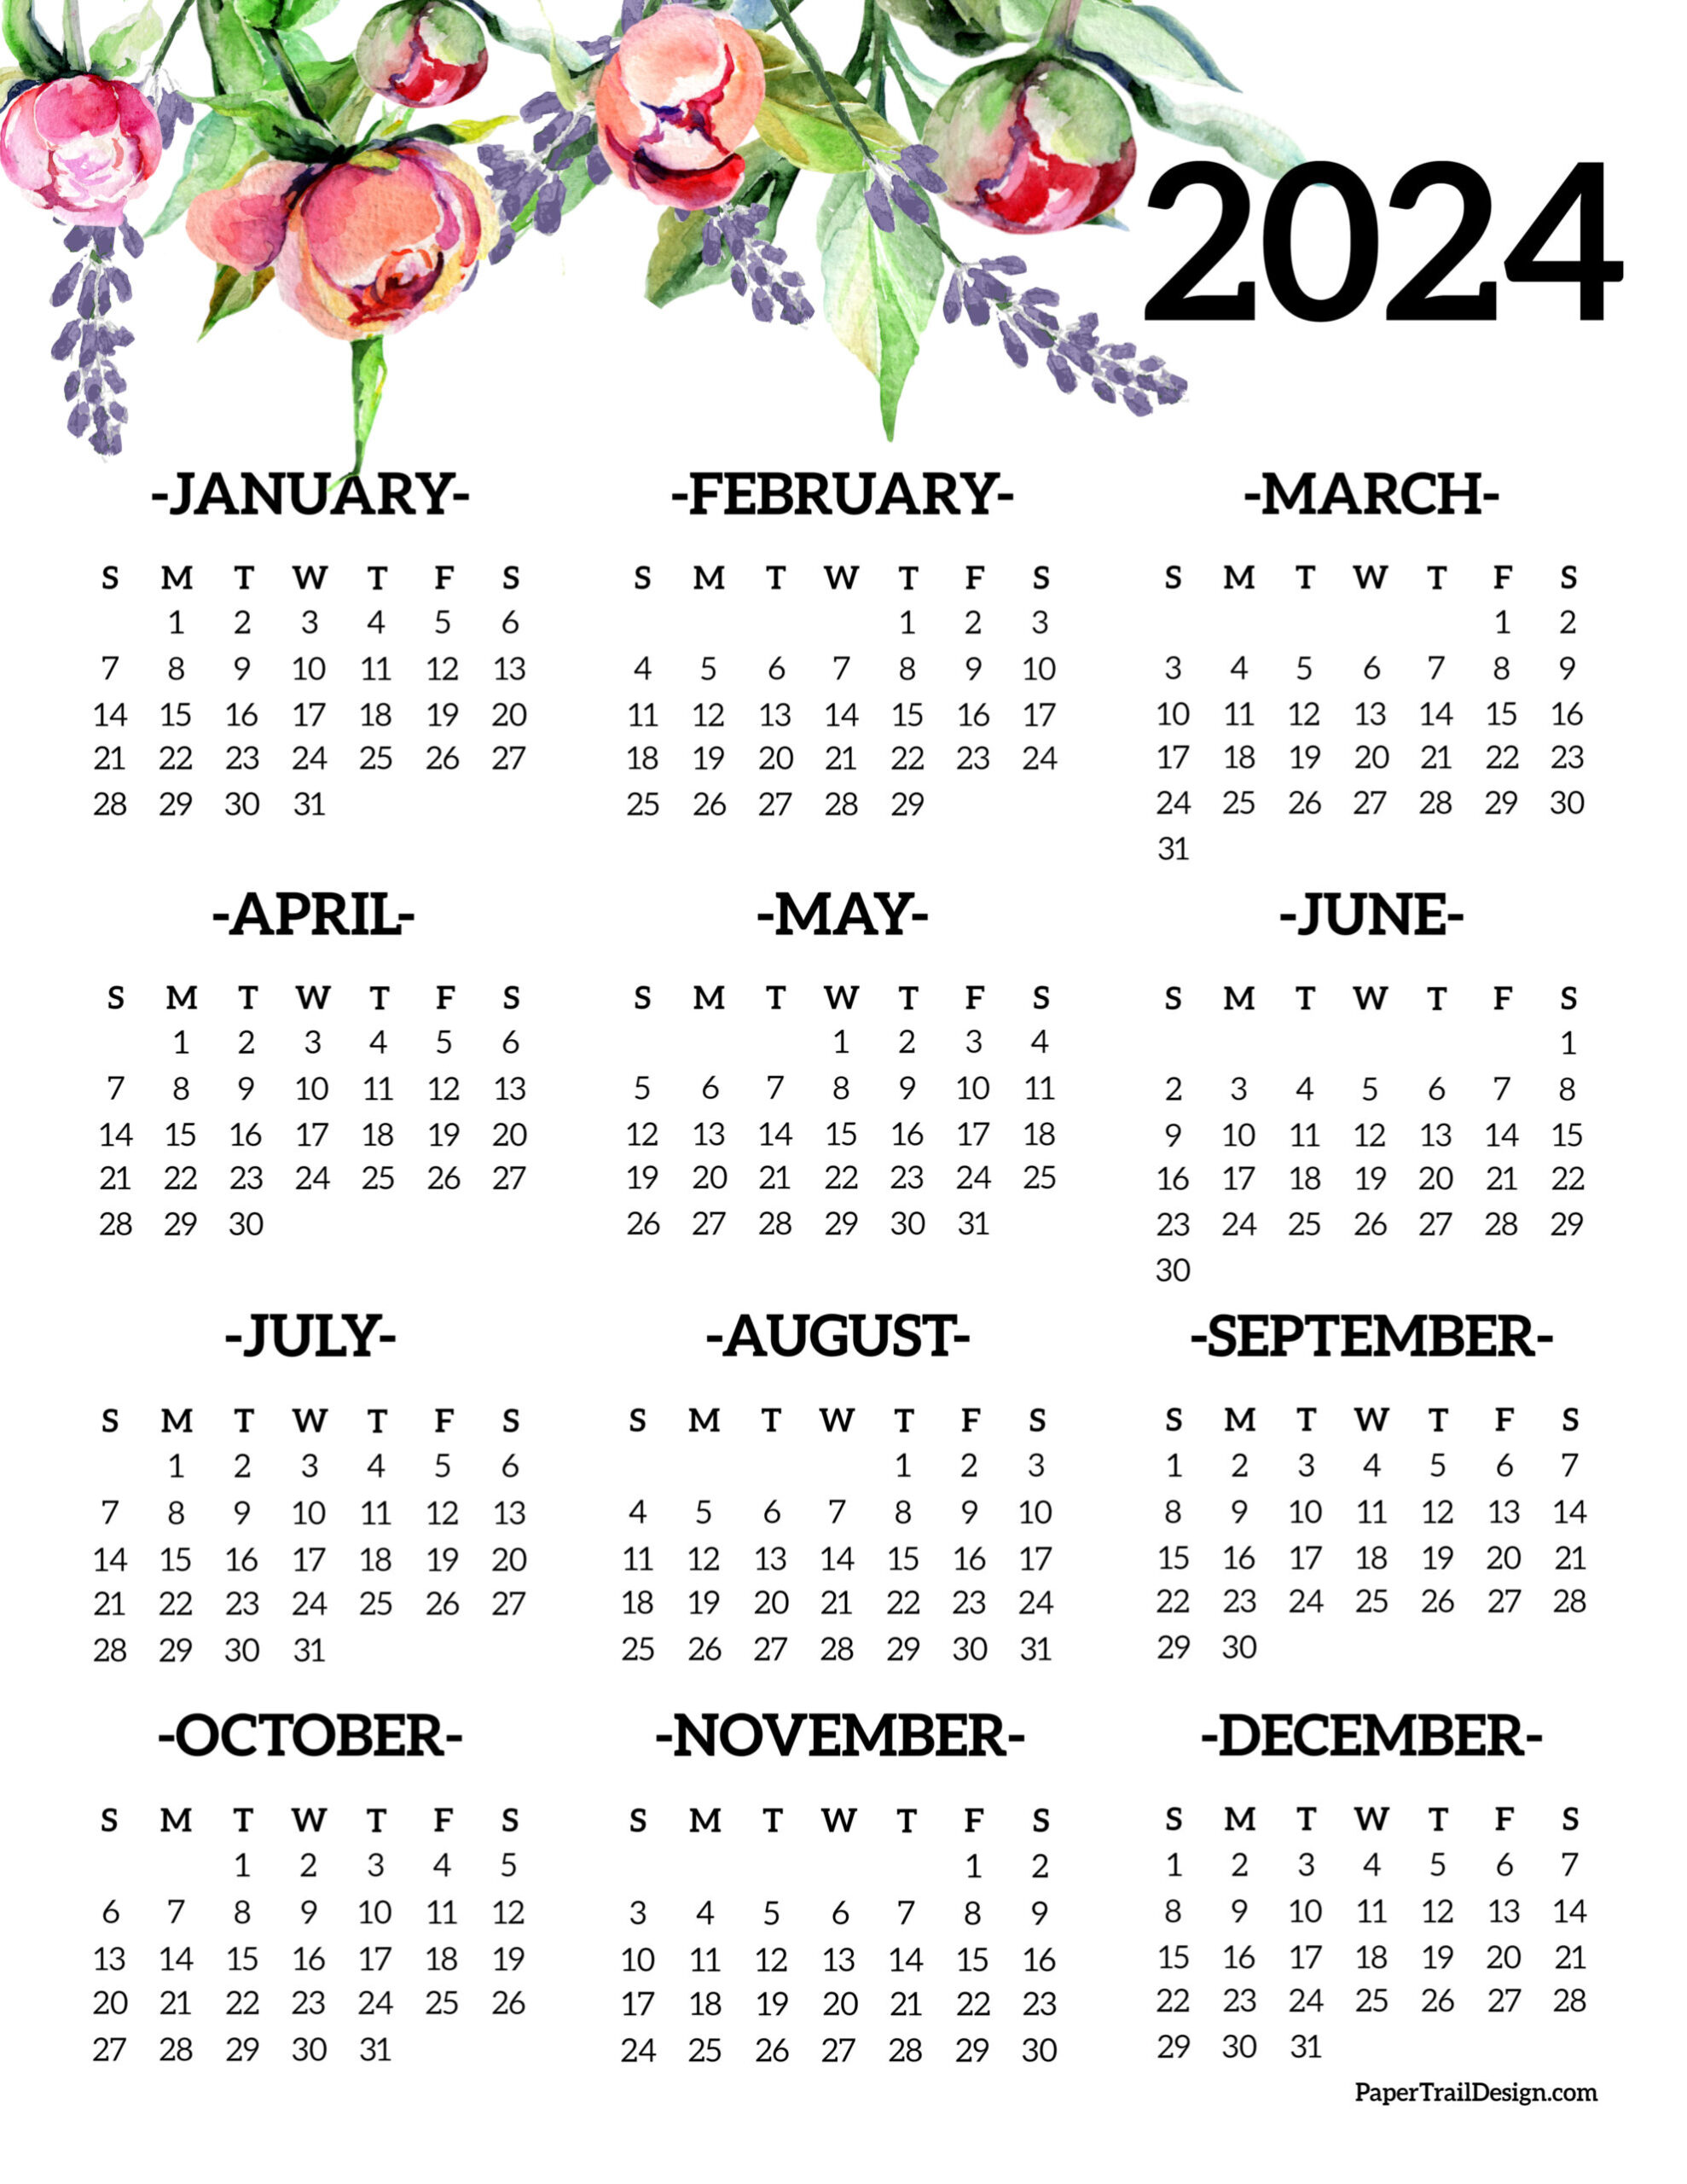 Calendar 2024 Printable One Page - Paper Trail Design | 2024 Yearly Calendar One Page